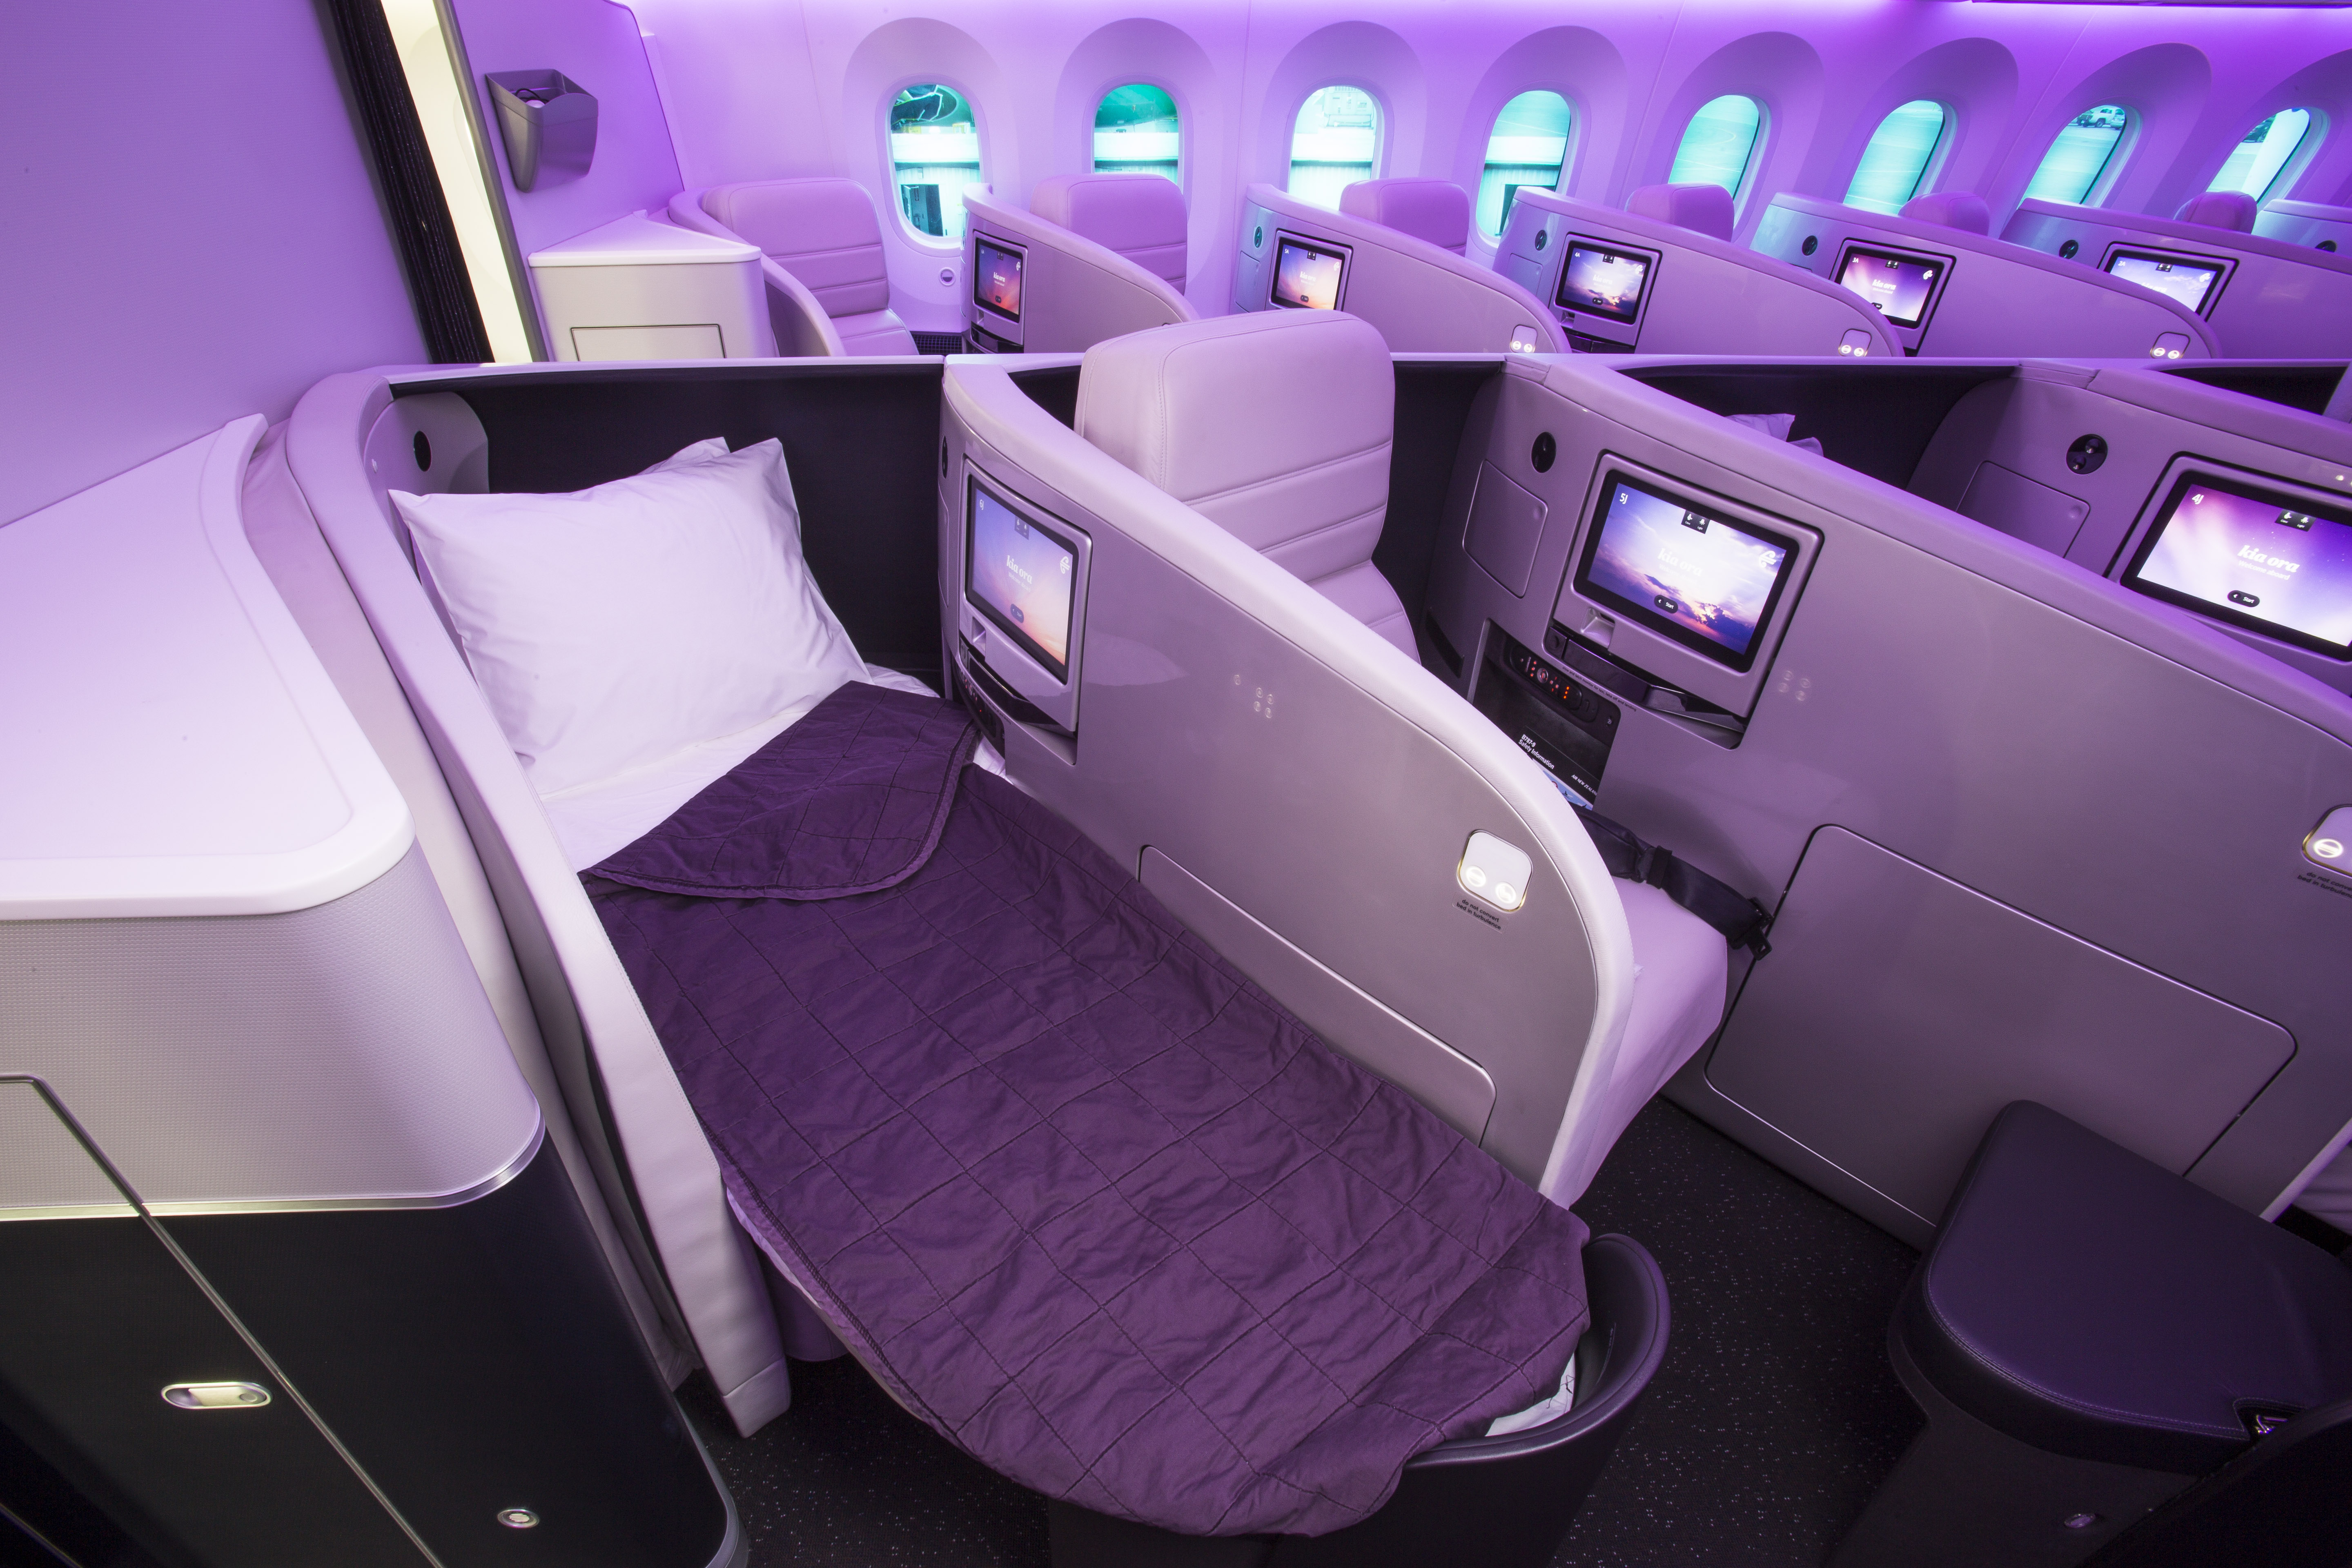 Look Inside the Awesome New Air New Zealand B787-9 Cabin - Point Me to